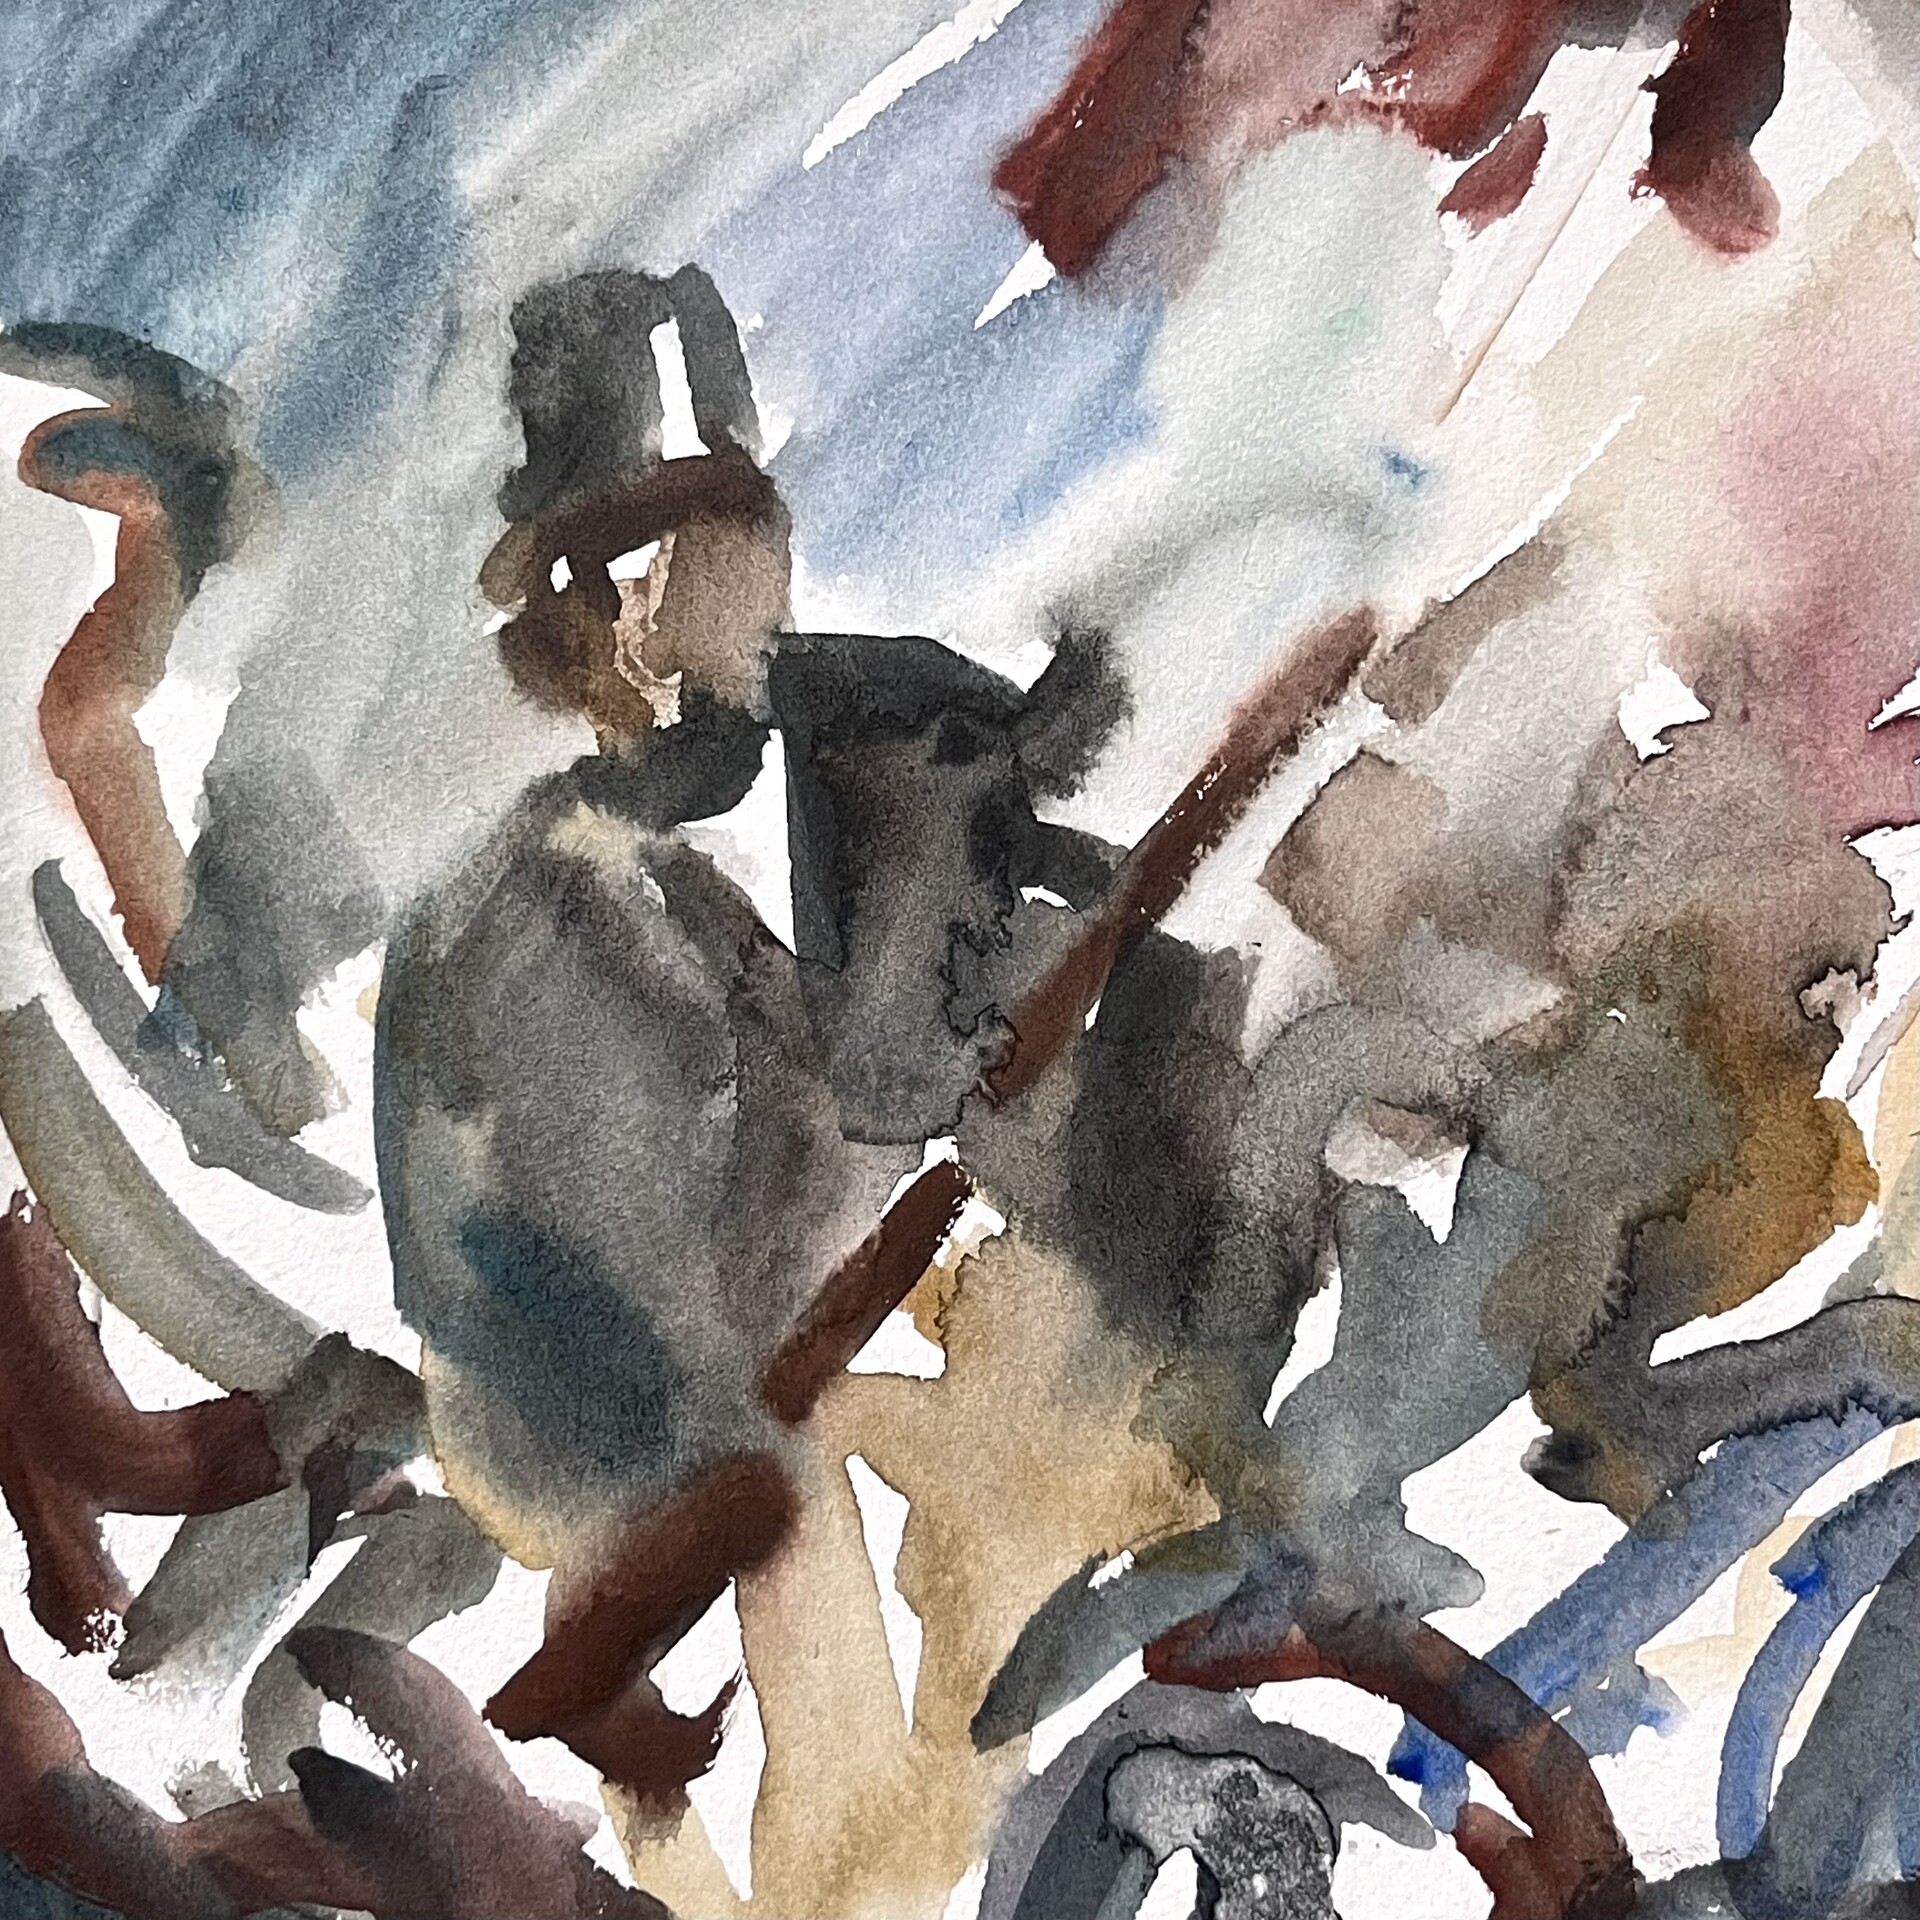 “Liberty leading the people”, inspired by the work of Eugene Delacroix, presented in Louvre, 21 x 29,5 cm, watercolours on paper, 2021